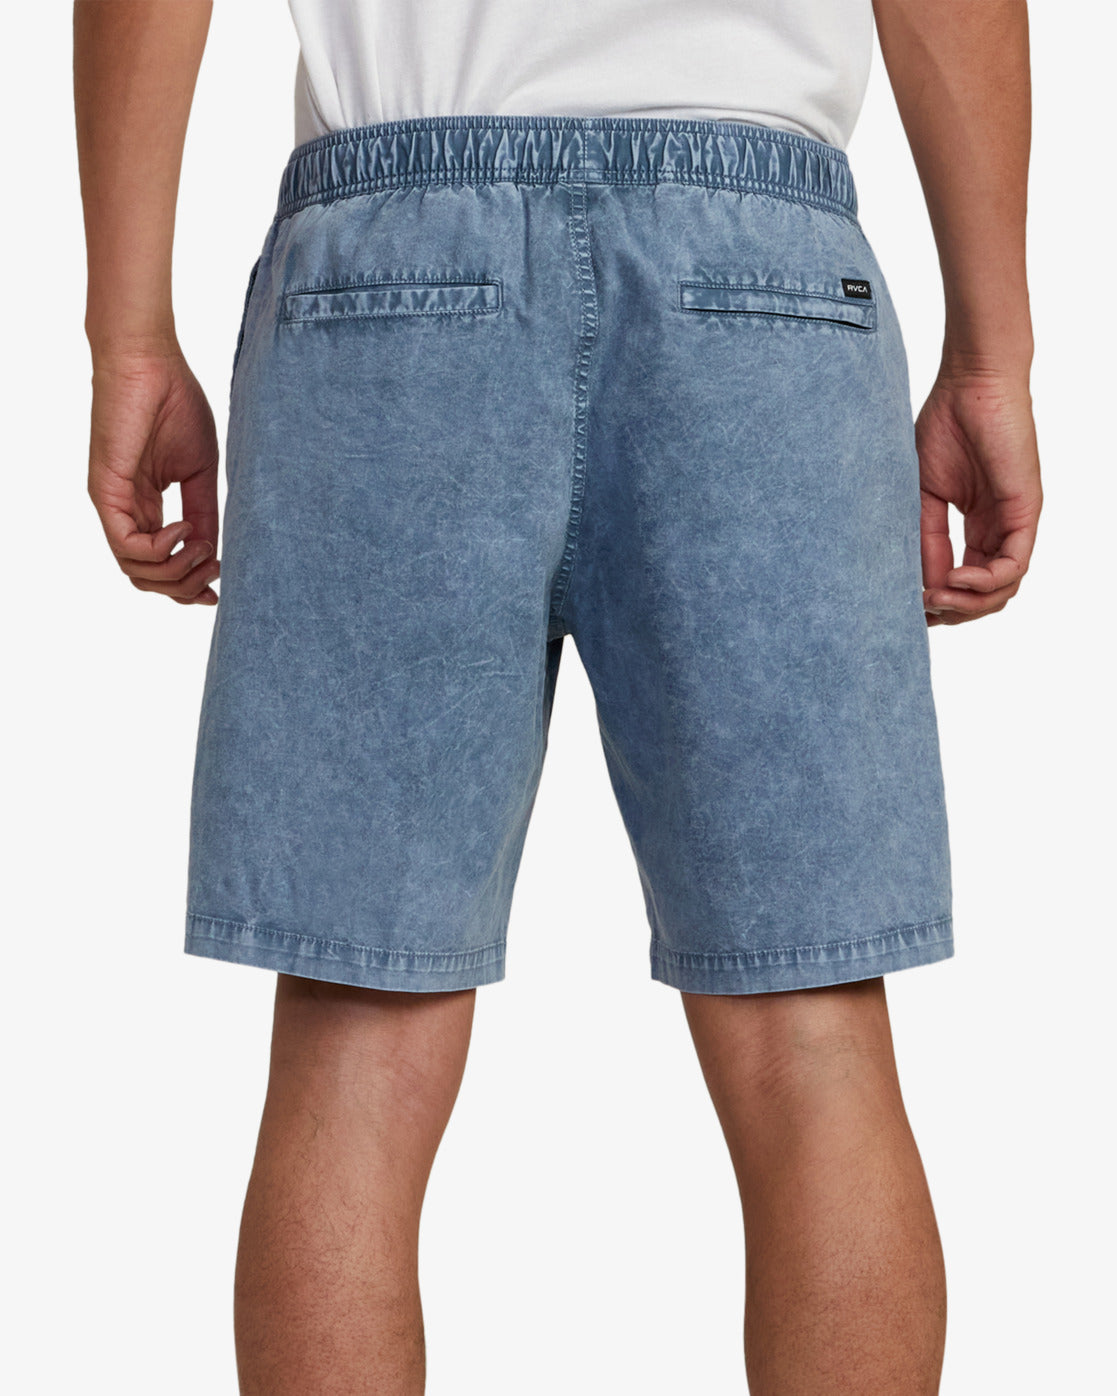 Load image into Gallery viewer, RVCA Civic Tropics Hybrid Short - Ash Blue
